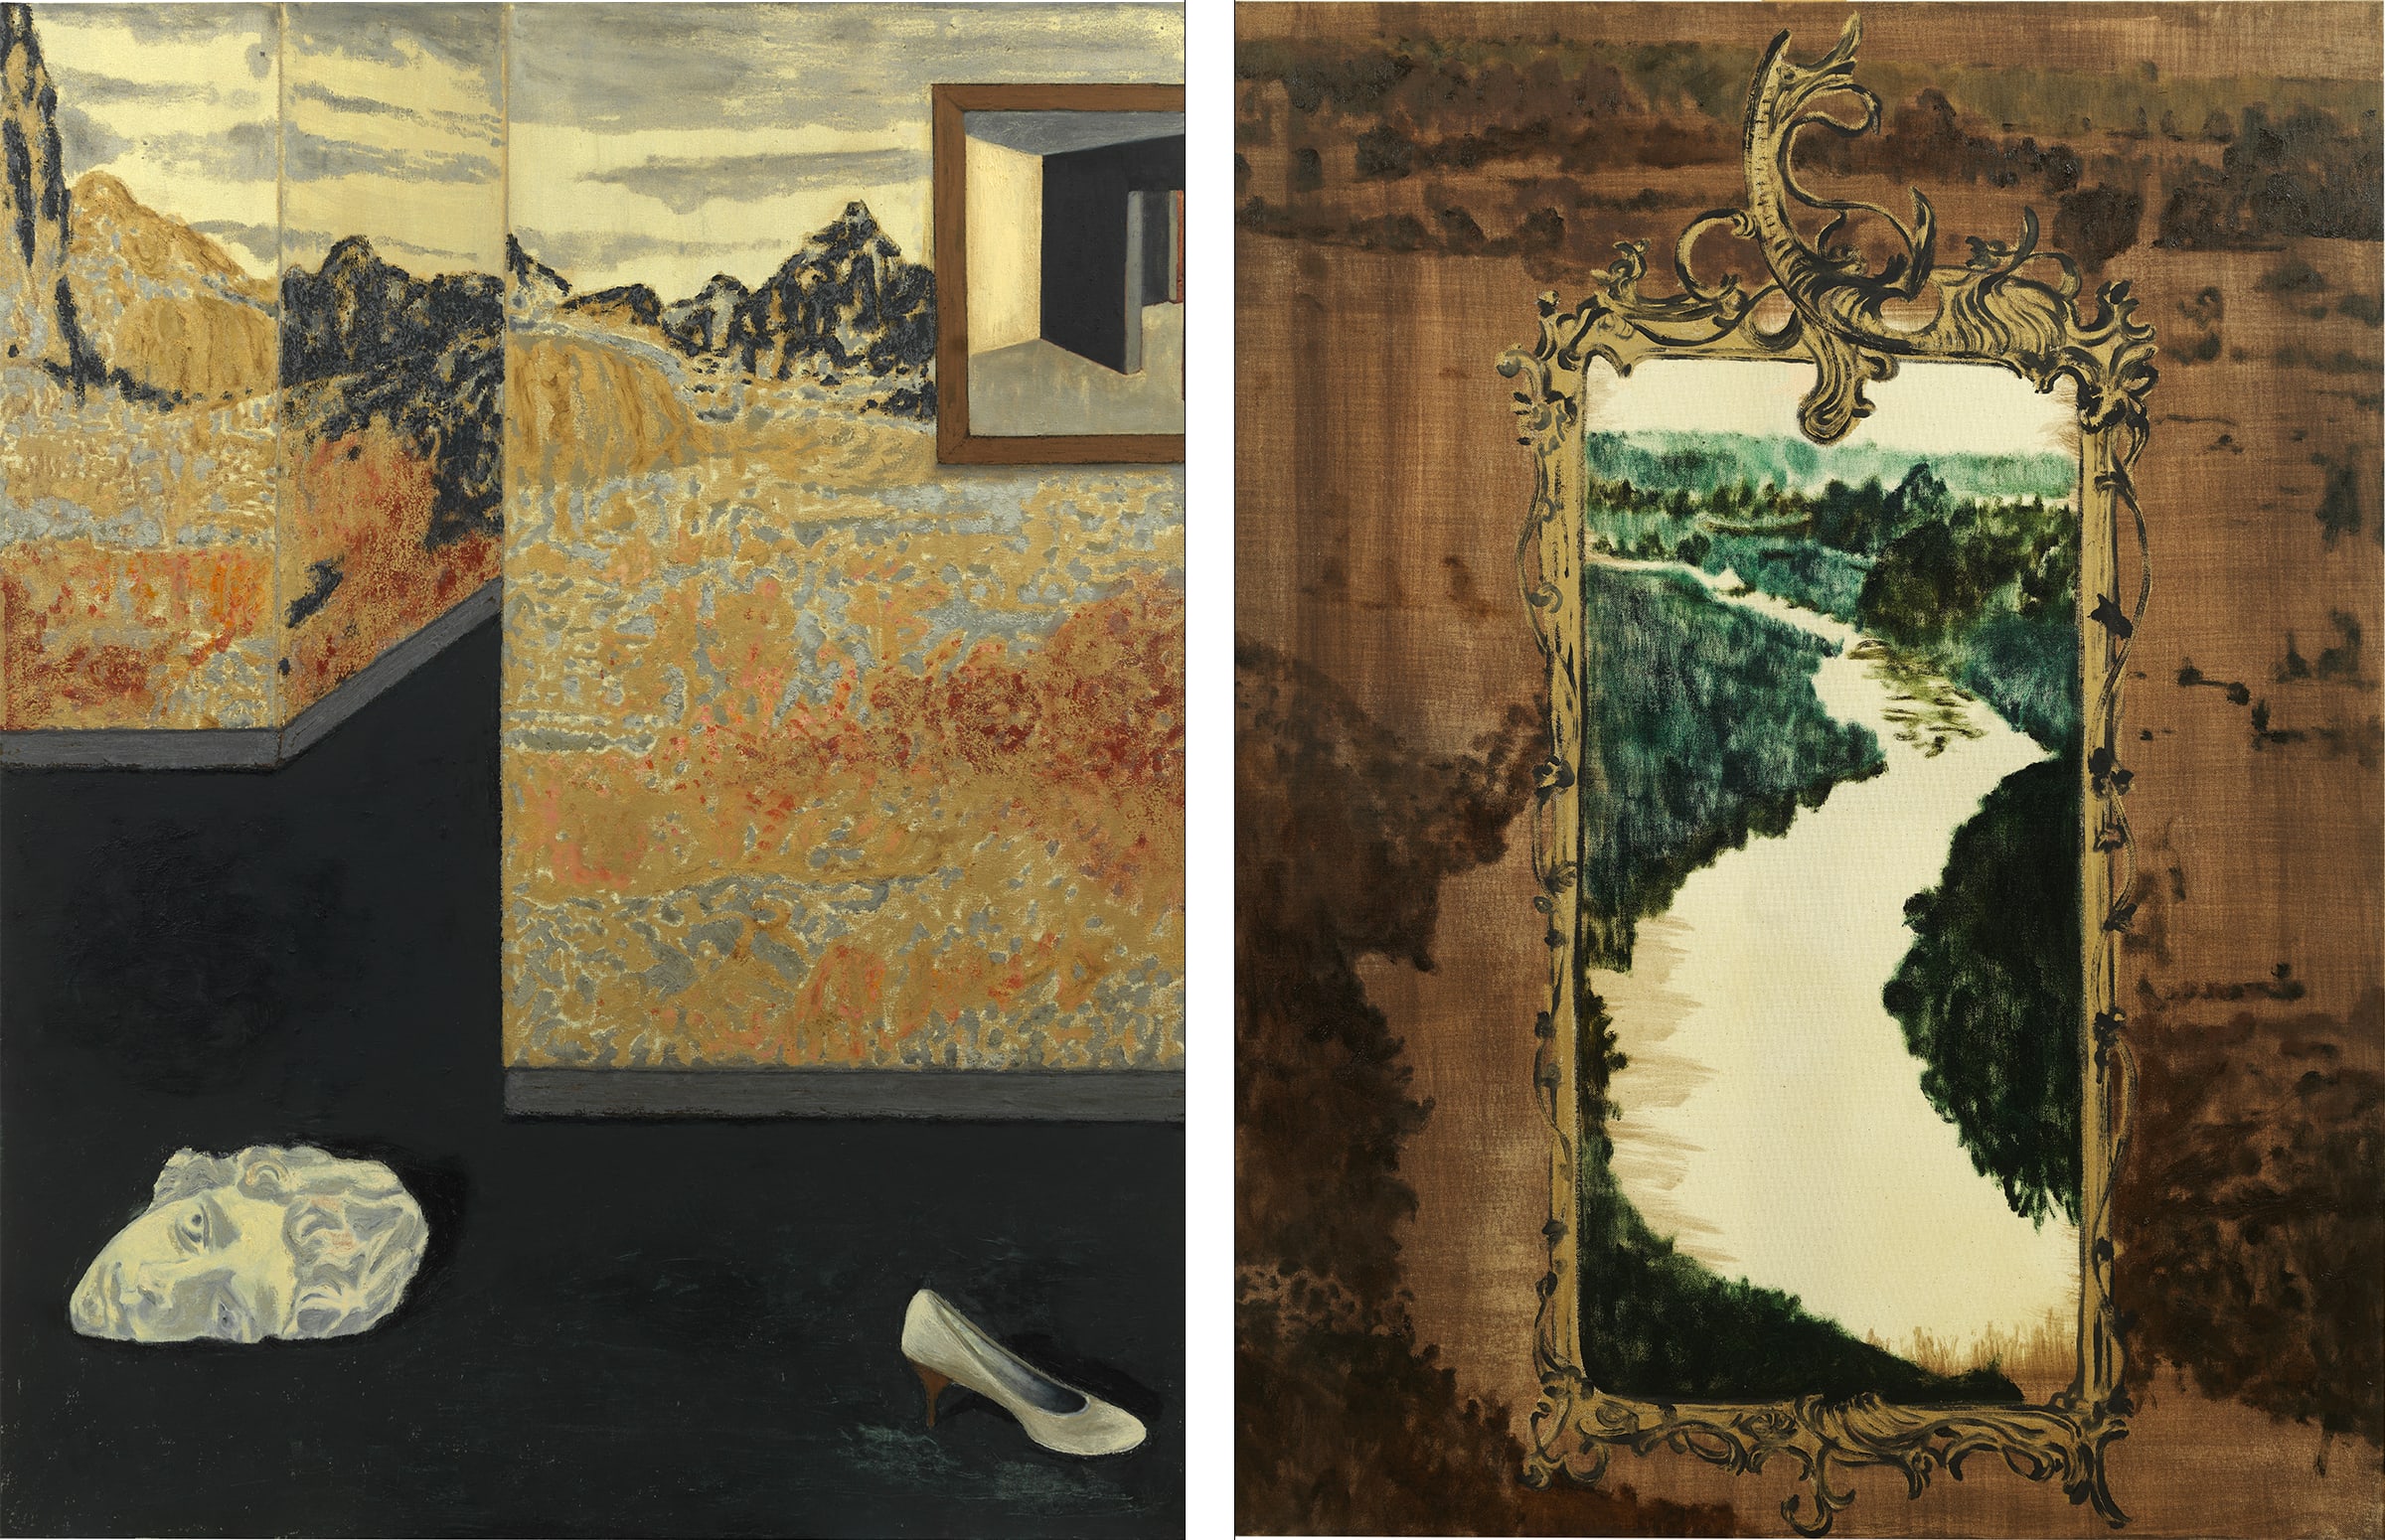 Artworks by Mamma Andersson. Left: Willy-nilly, 2023. © Mamma Andersson/Artists Rights Society (ARS), New York/ Bildupphovsrätt, Sweden. Courtesy of the artist and David Zwirner. Right: Speculi Oculo II, 2023. © Mamma Andersson/Artists Rights Society (ARS), New York/. Bildupphovsrätt, Sweden. Courtesy of the artist and David Zwirner.